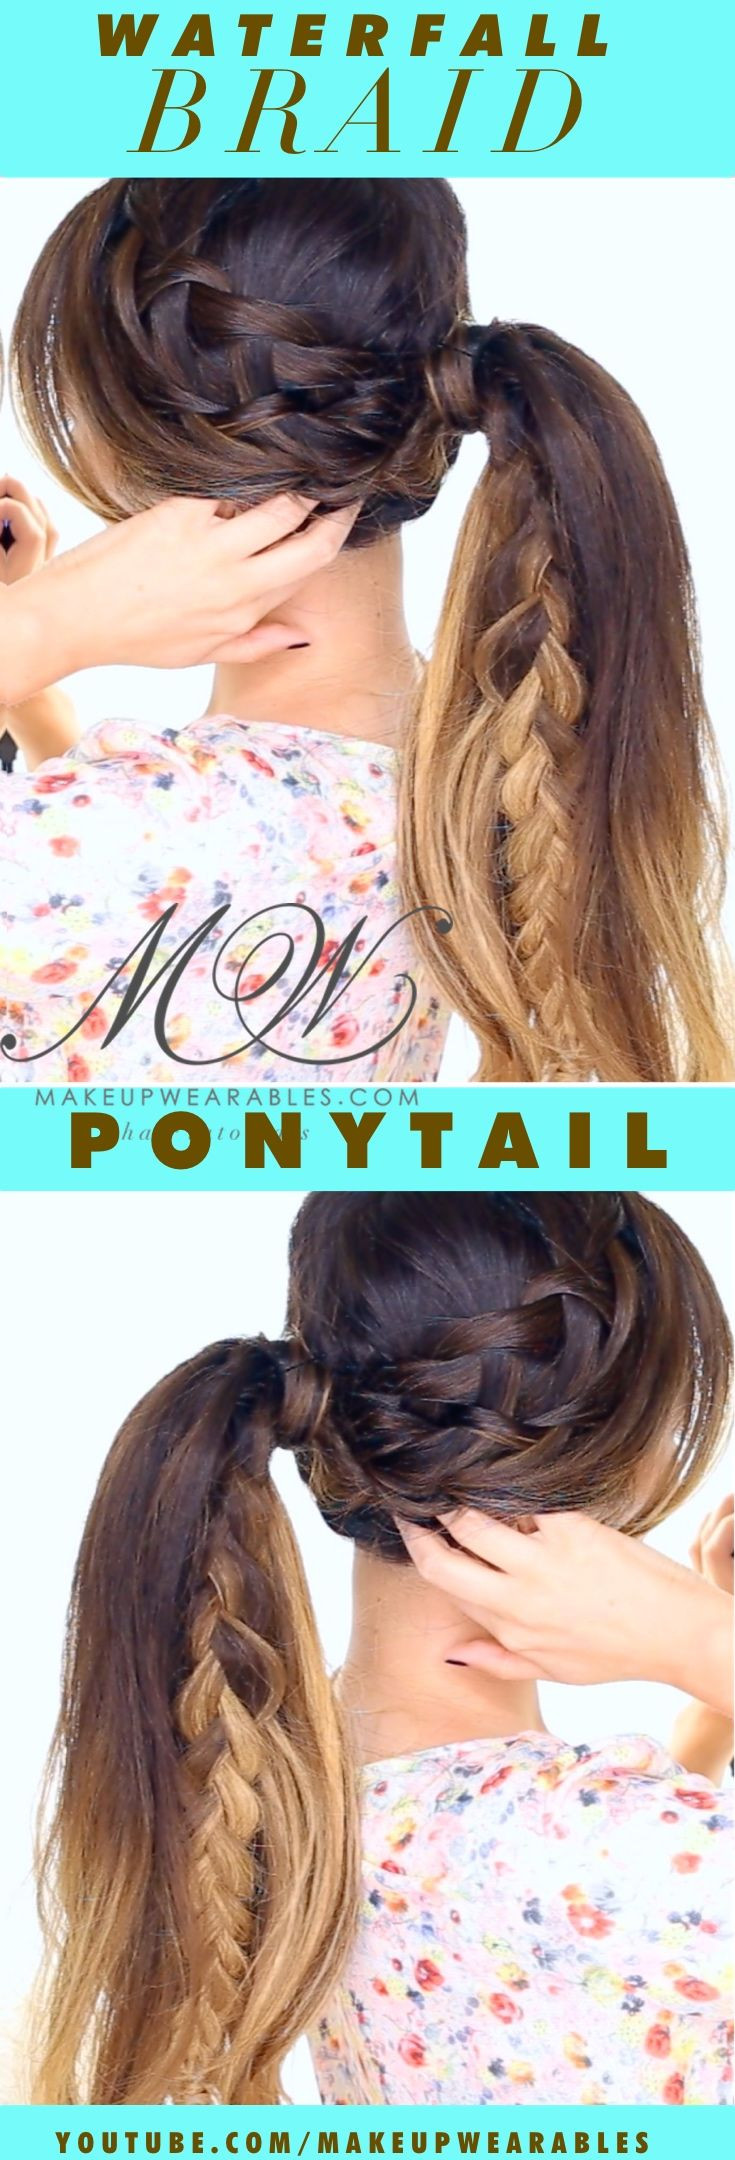 Cute Fall Hairstyles
 to watch How to Waterfall Braid Ponytail Cute